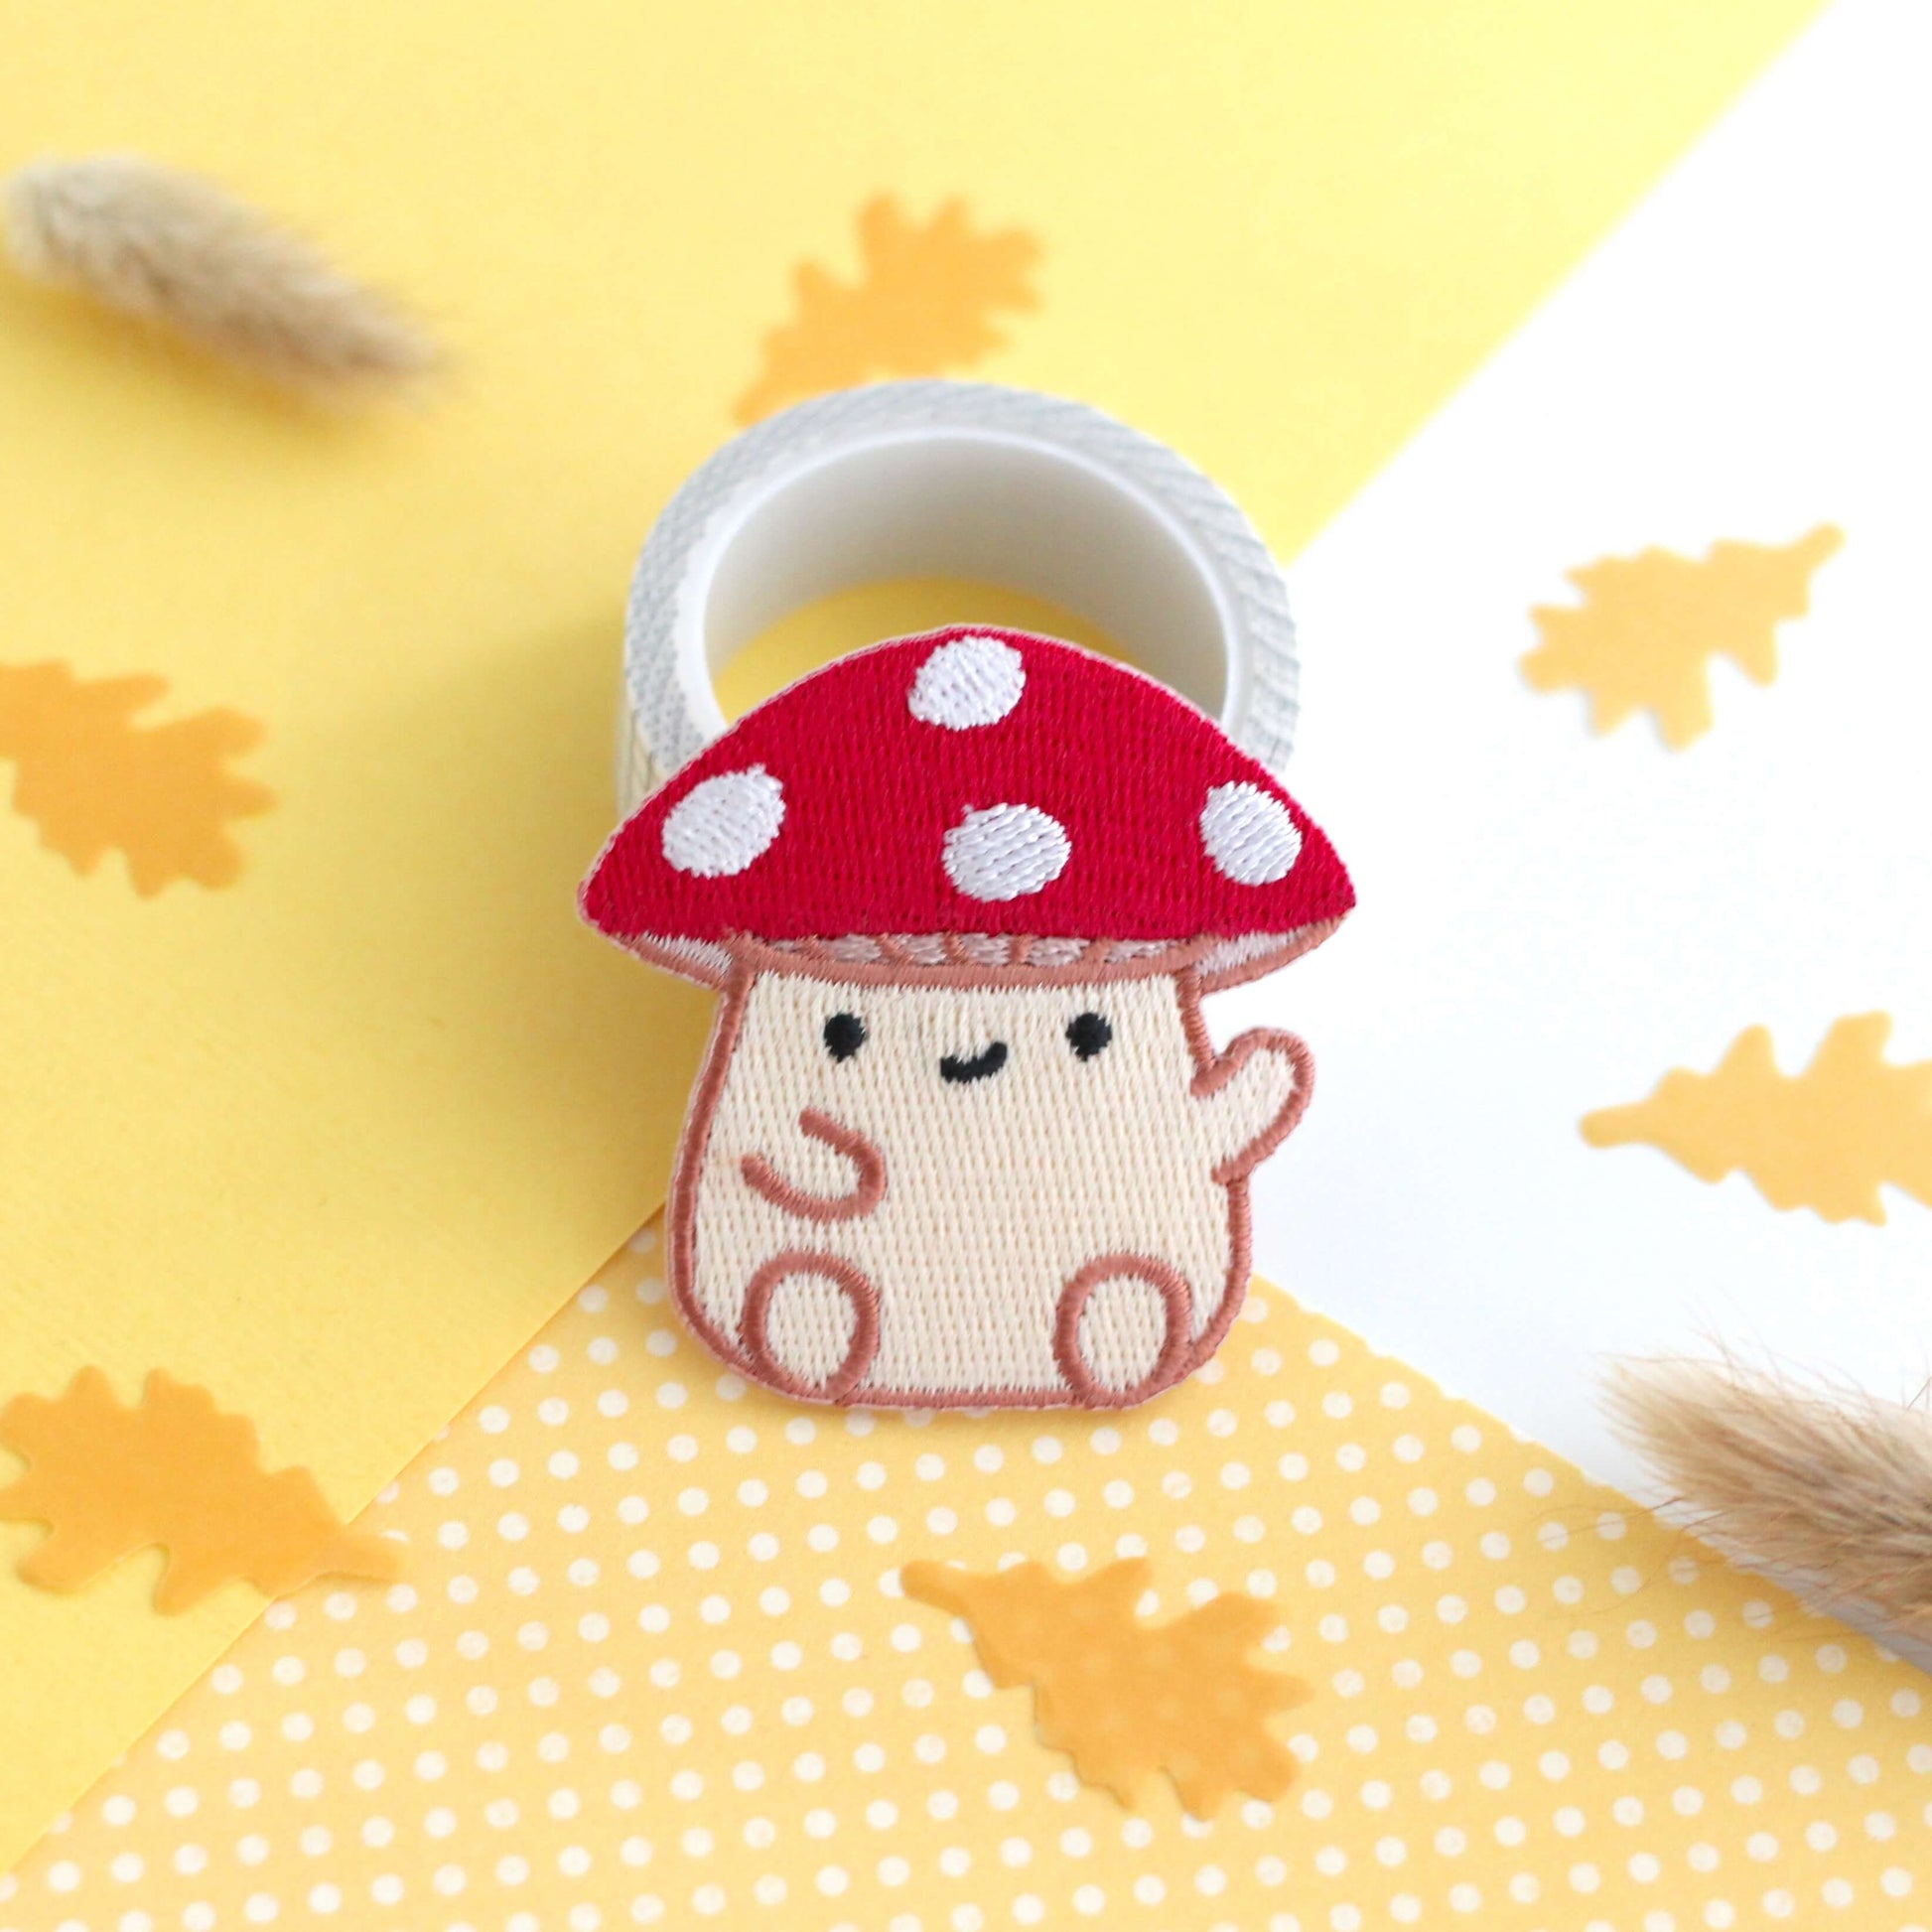 Cute Red Cap Mushroom Iron On Patch - Cottagecore Embroidered